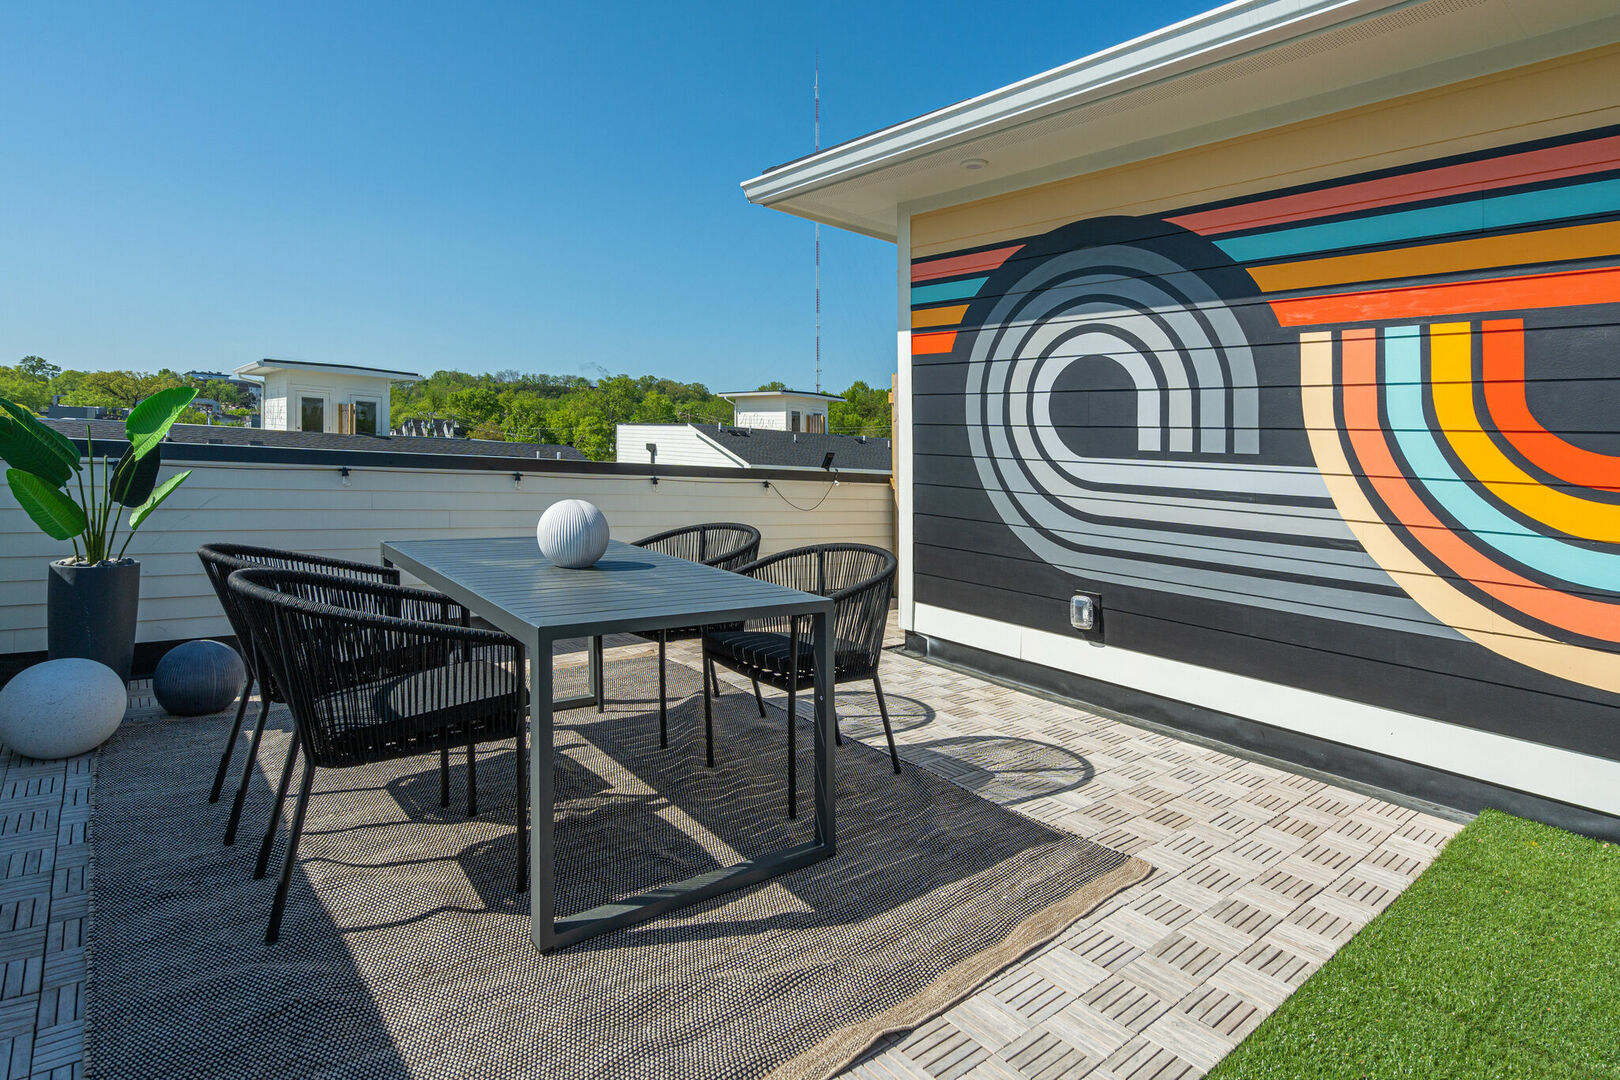 1st Unit, 4th Floor: Private rooftop deck outdoor dining table (seats 4) and lounge area. Entire space is lined with bistro lights and includes a photo op mural!